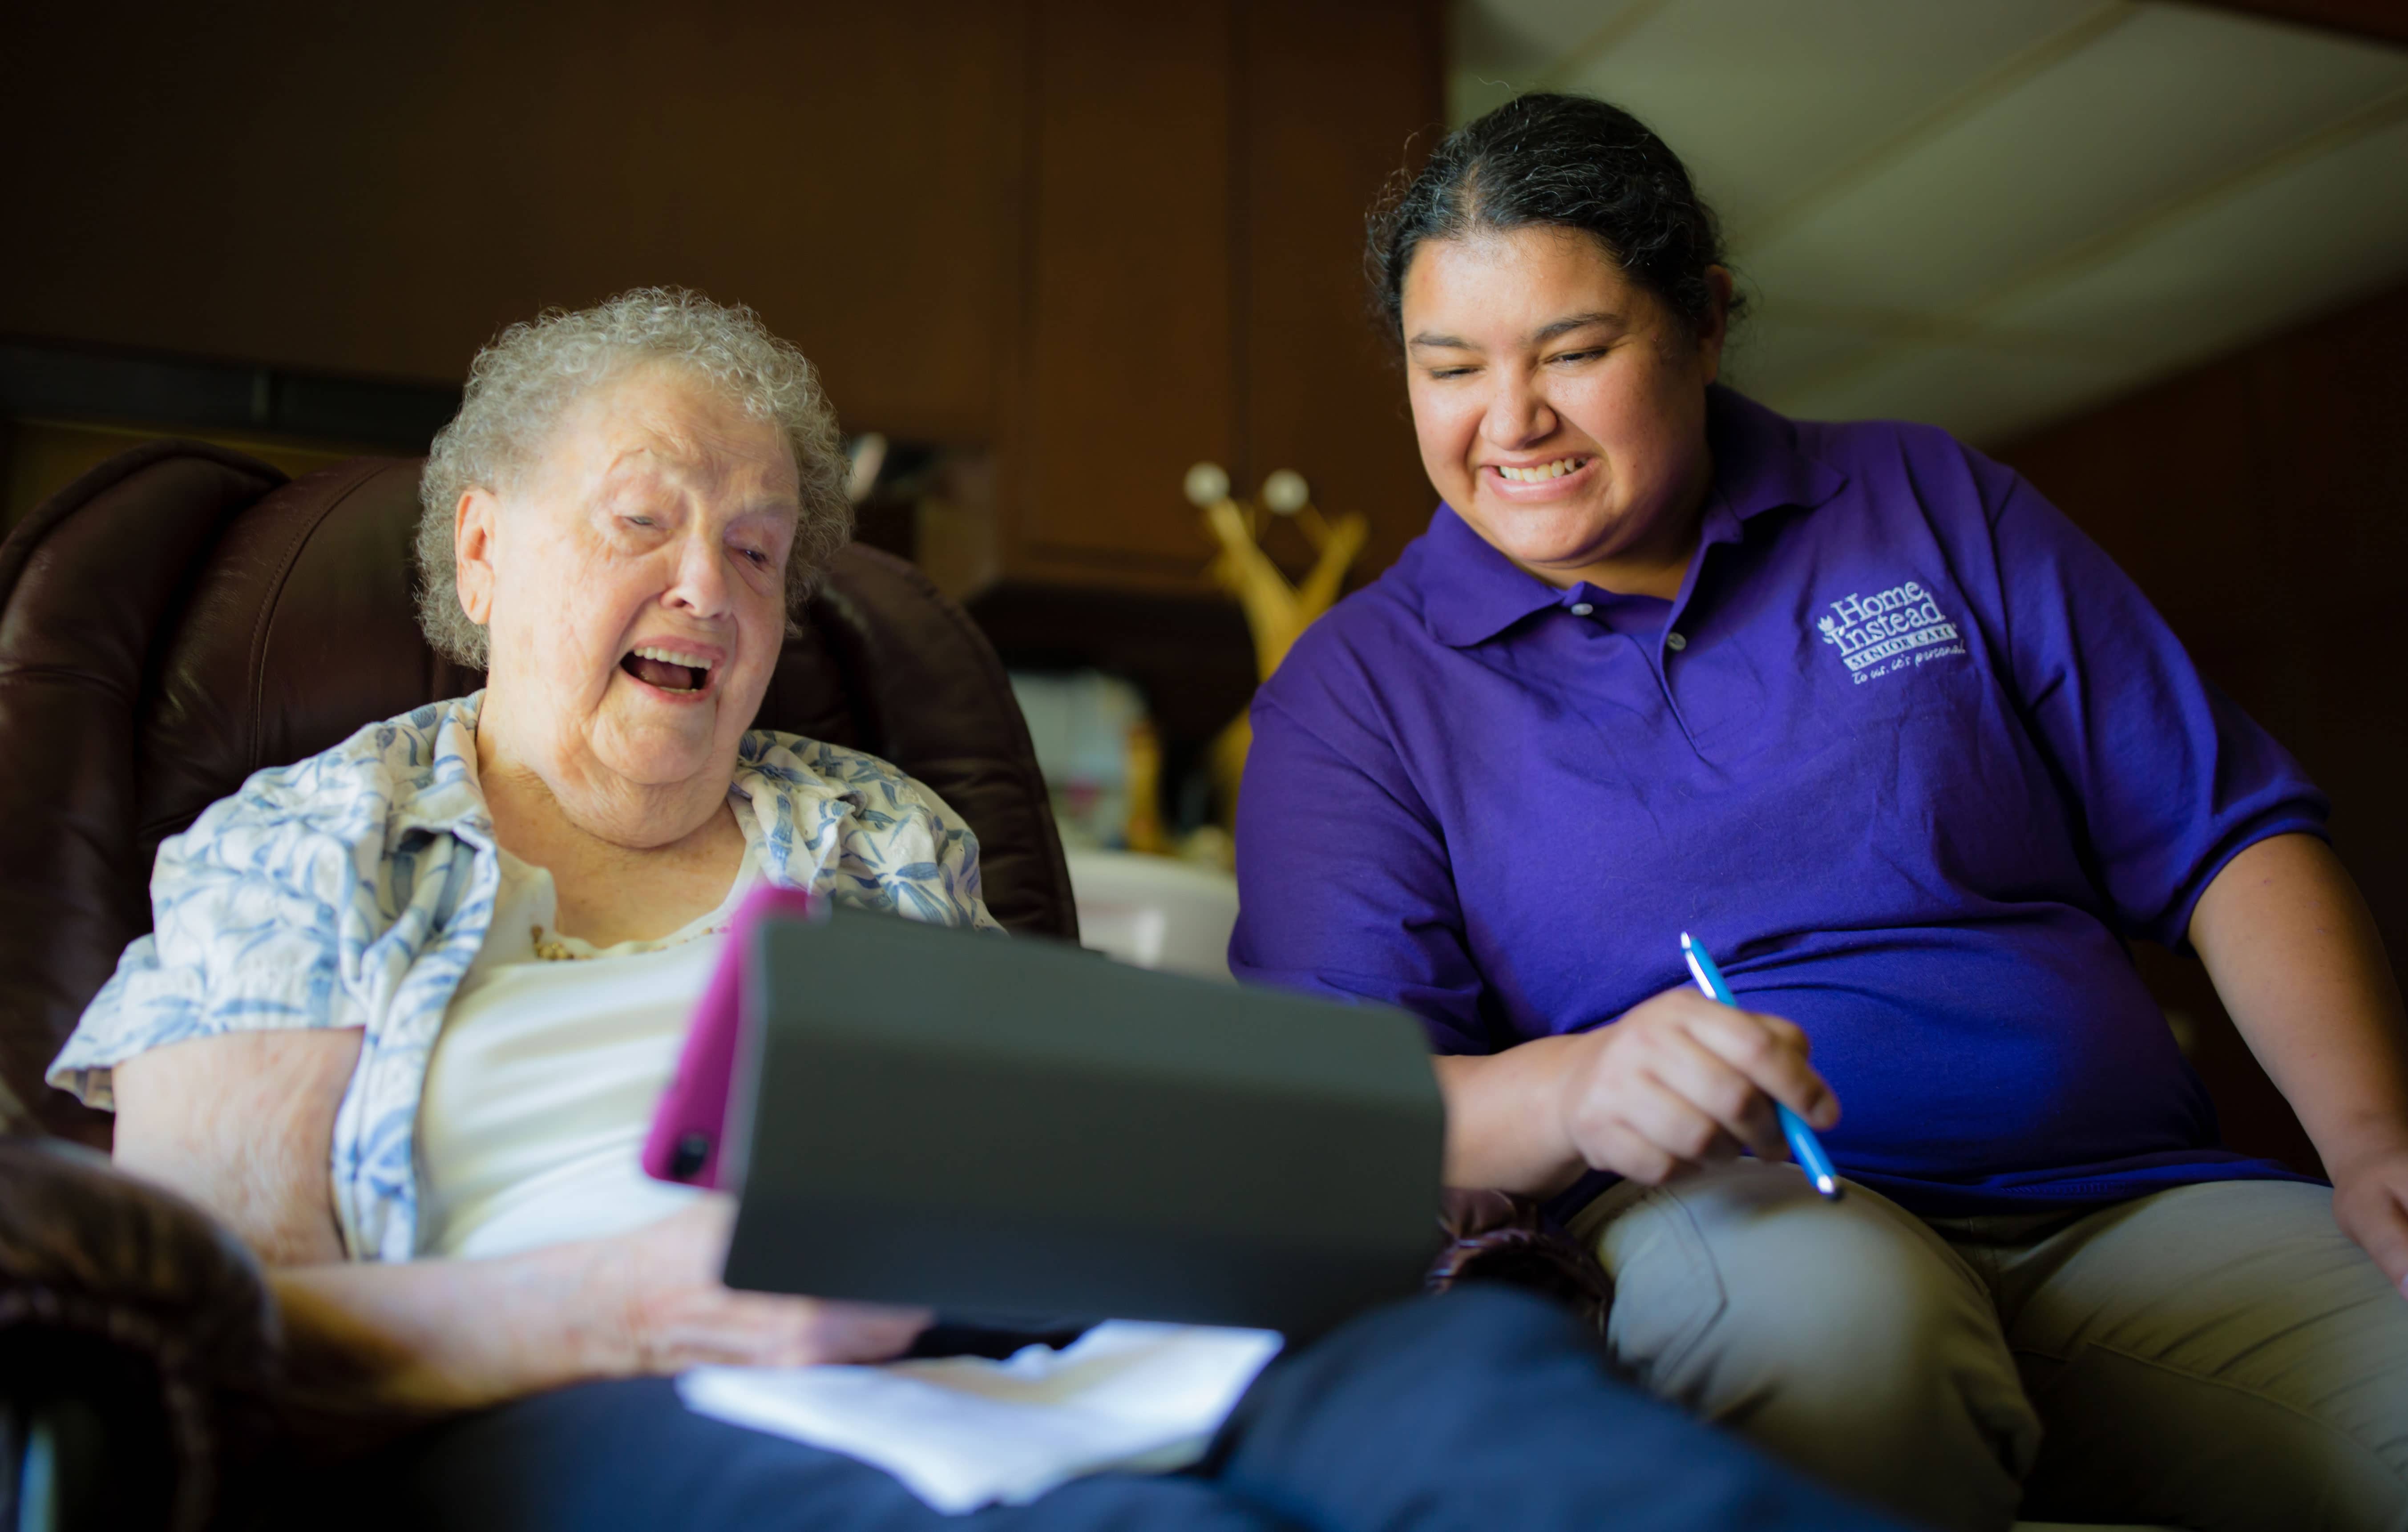 Elder care Caregiver performing senior care services by sitting with a senior reading and smiling.